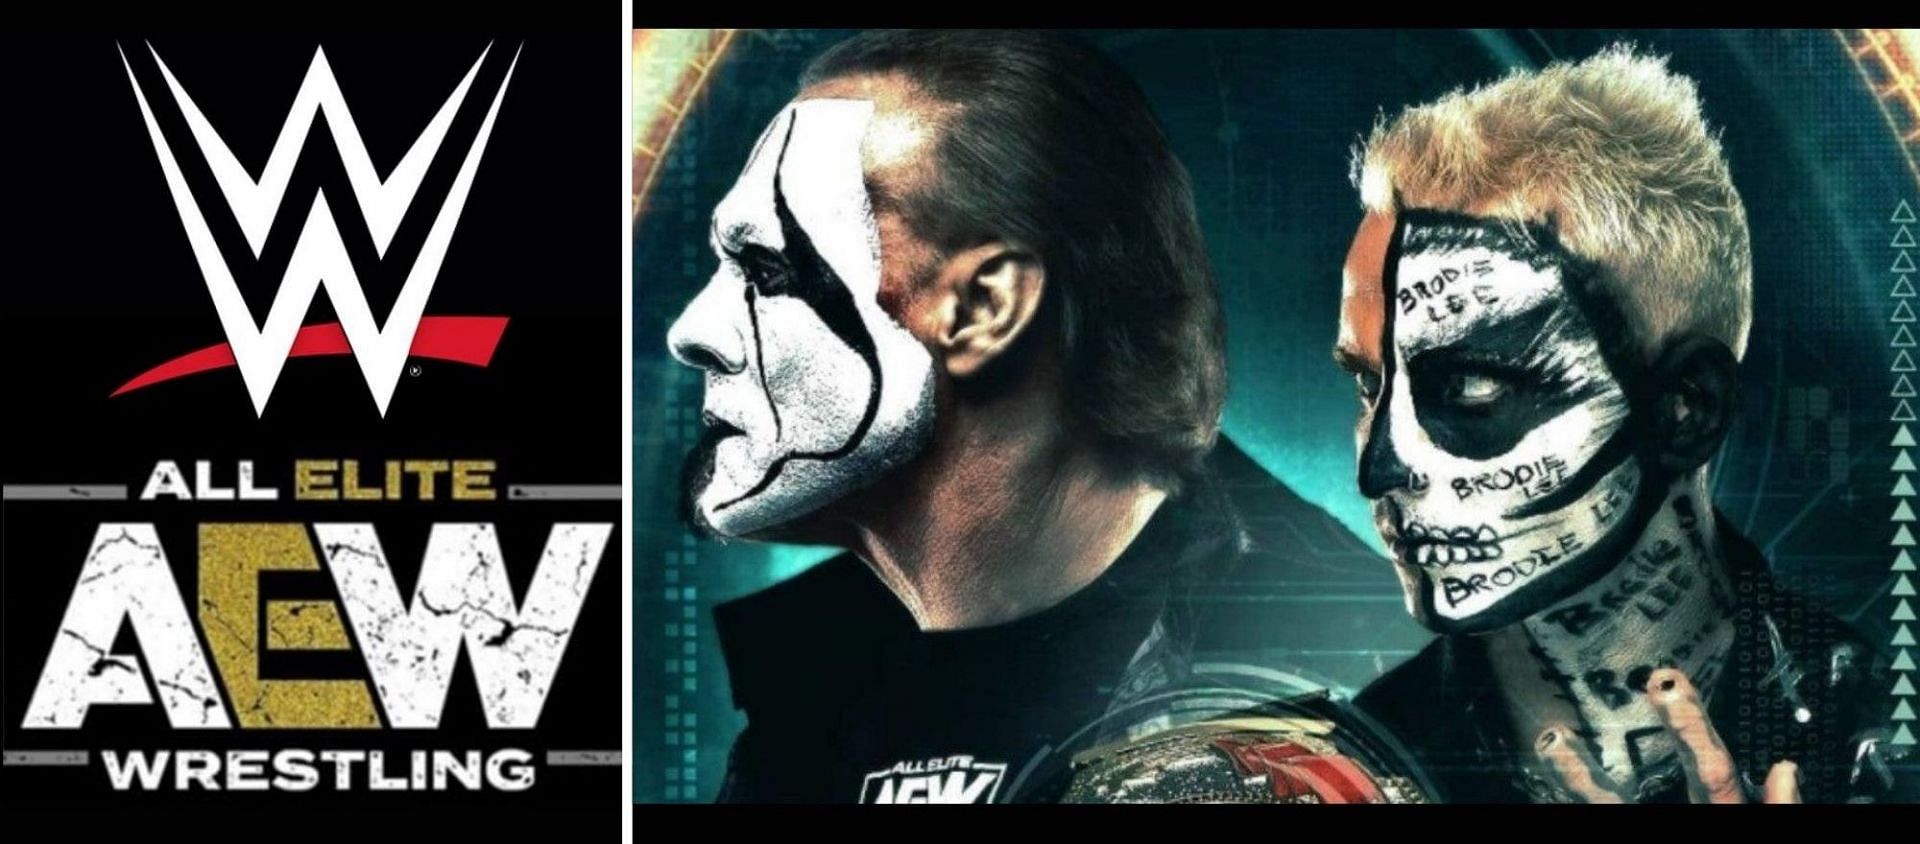 Sting and Darby have had some awe-inspiring performances in AEW so far!